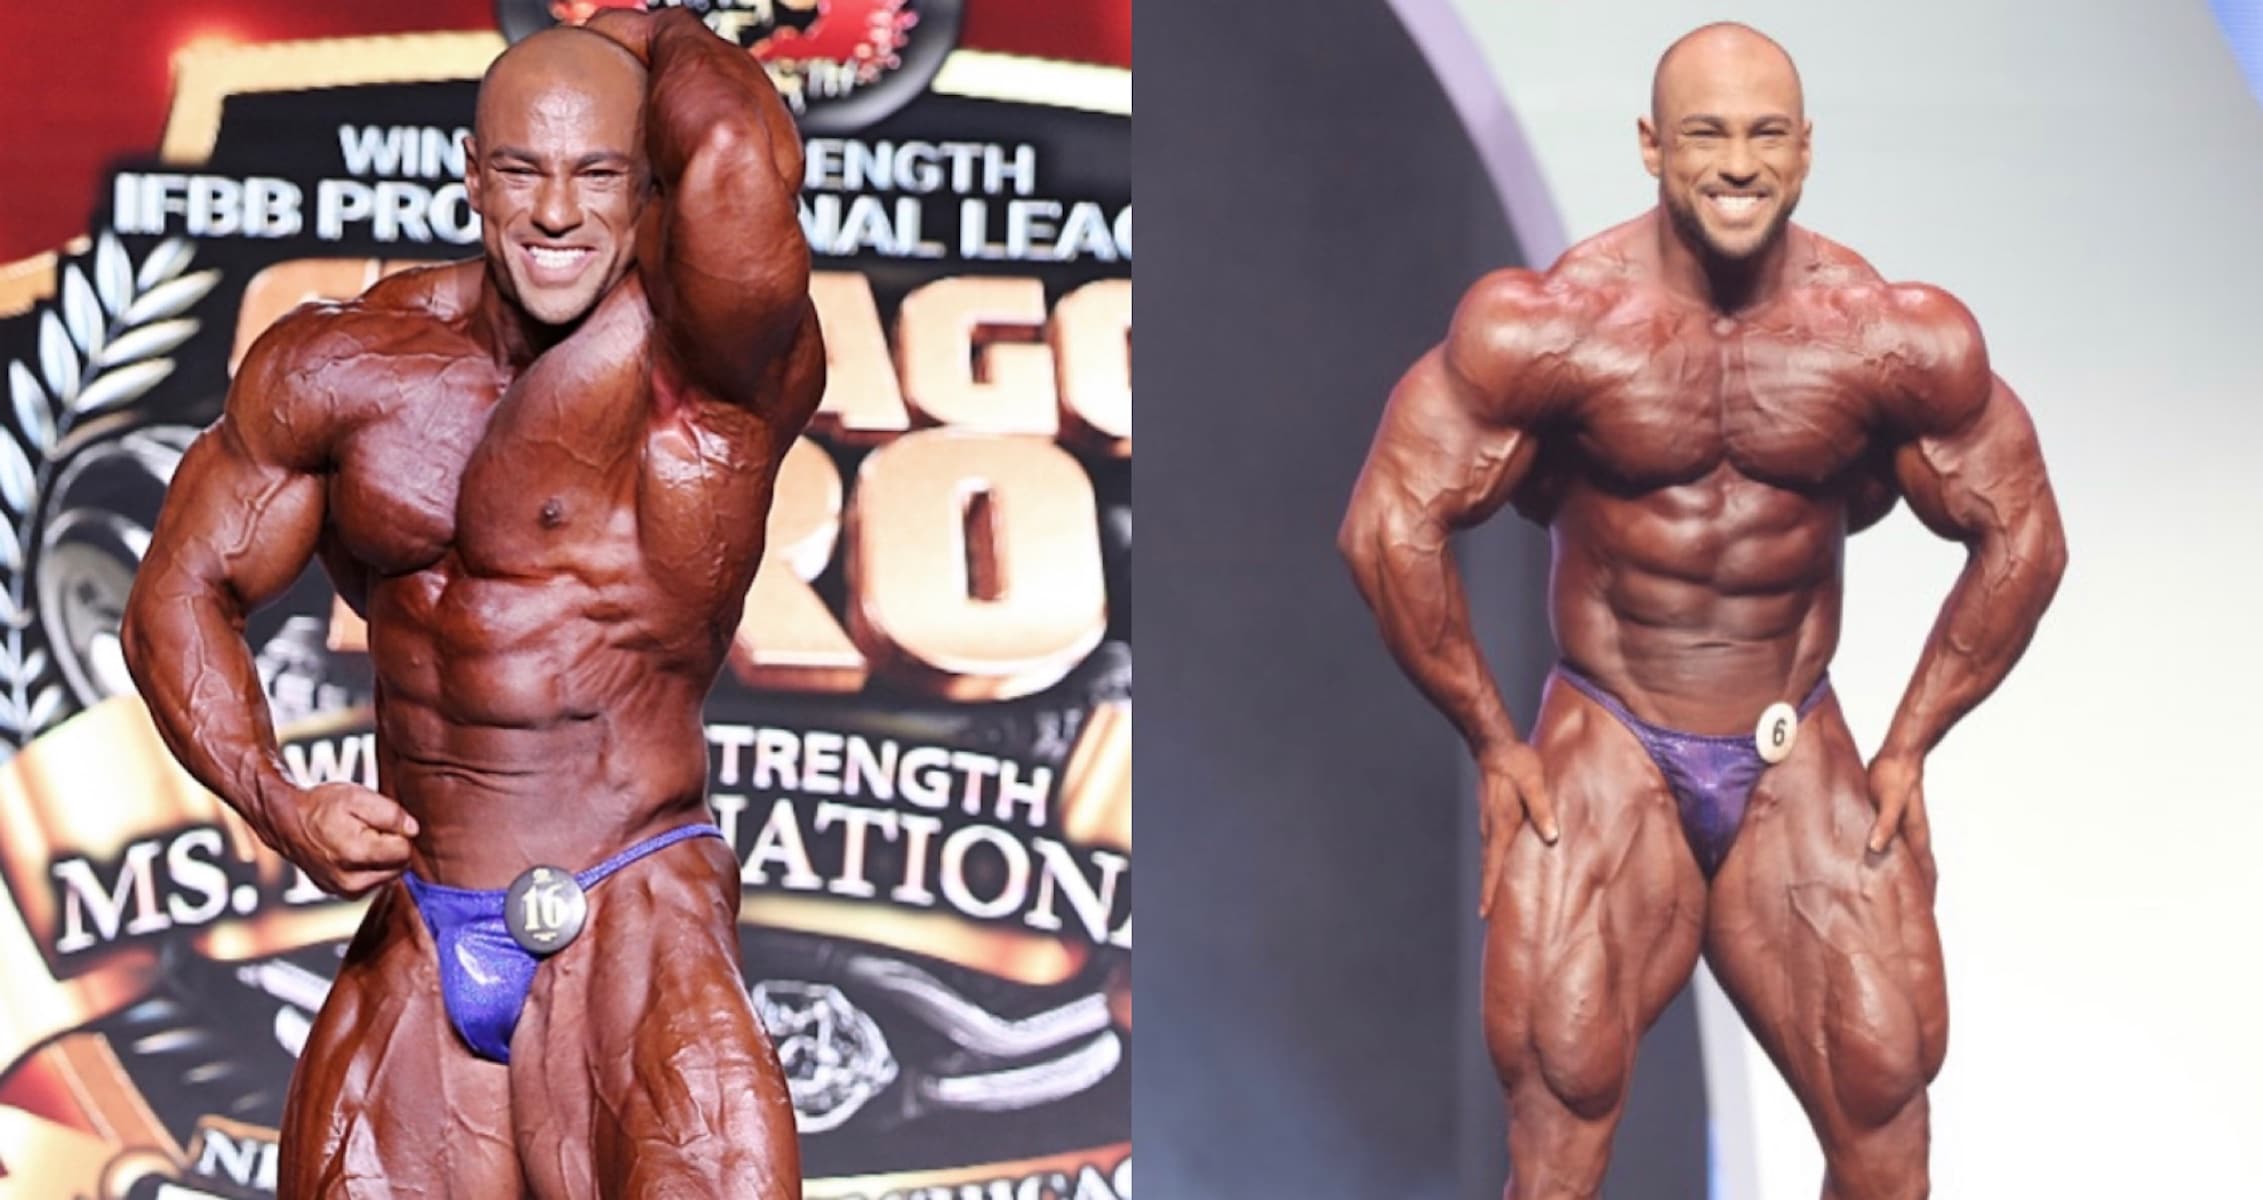 2022 Toronto Pro Supershow Preview Can Mohamed Shaaban Secure The Title?